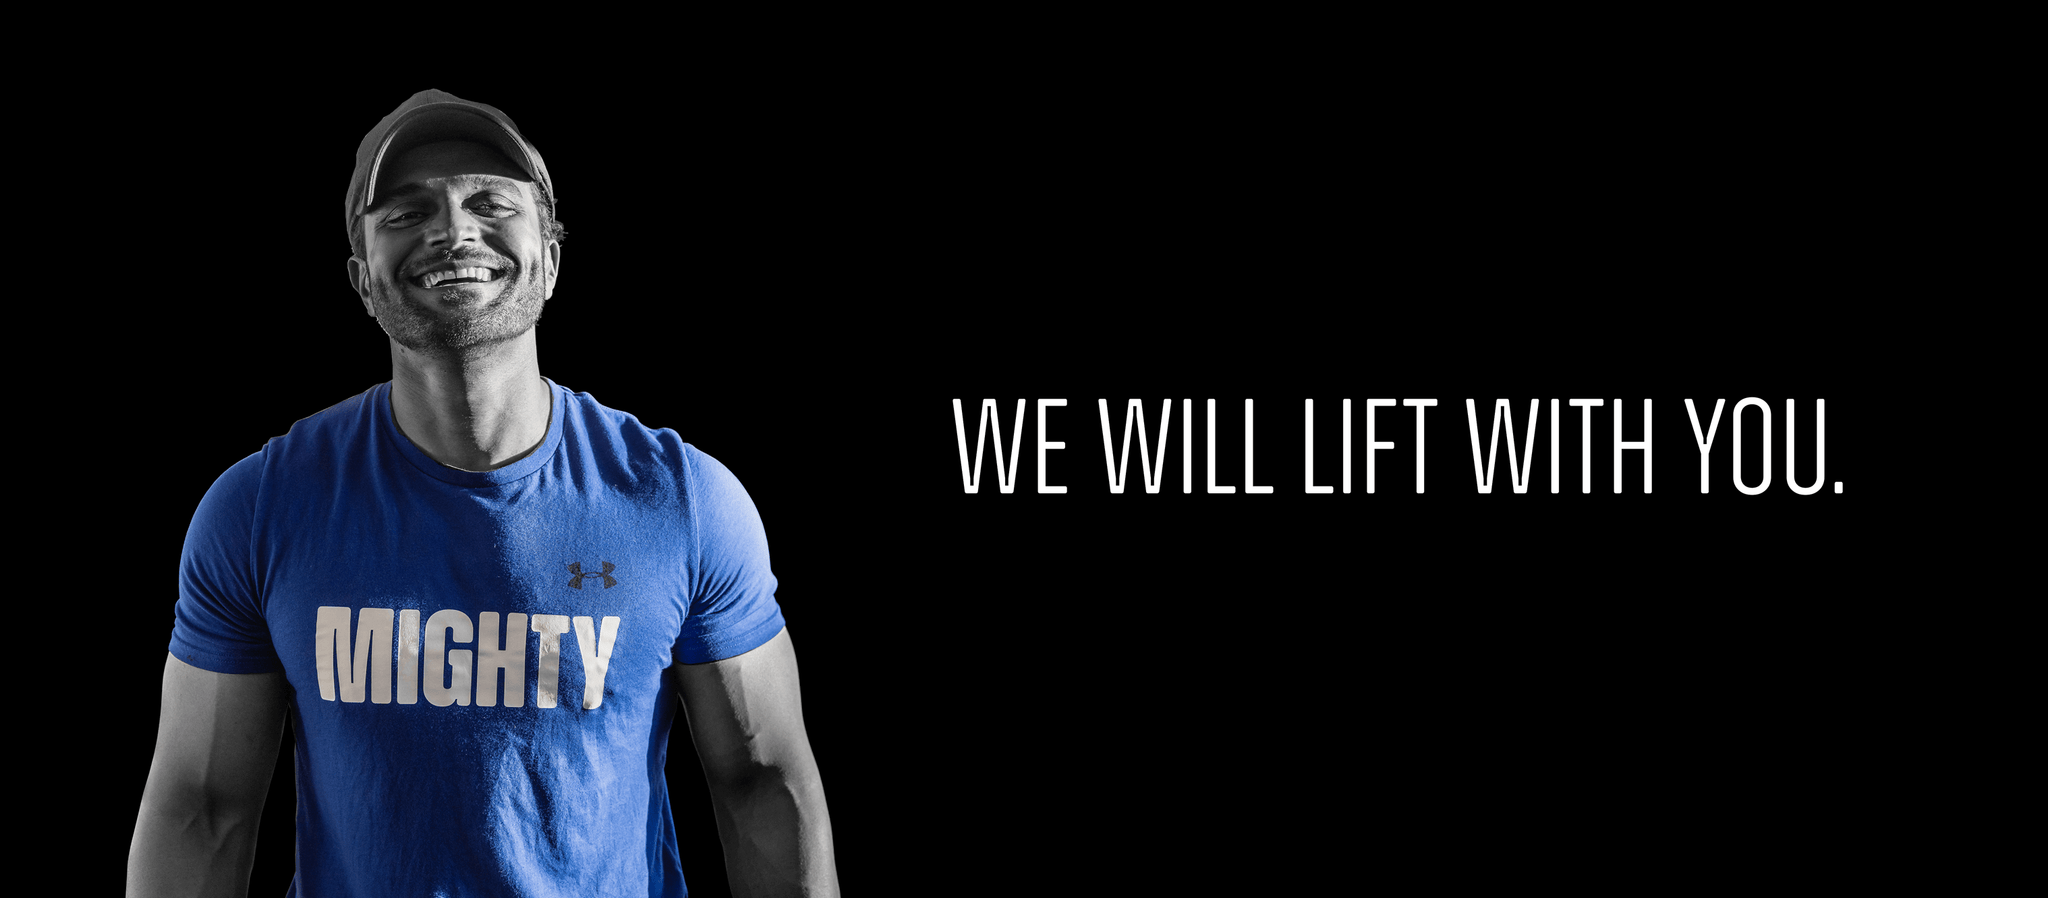 Mighty Fitness - We Lift With You